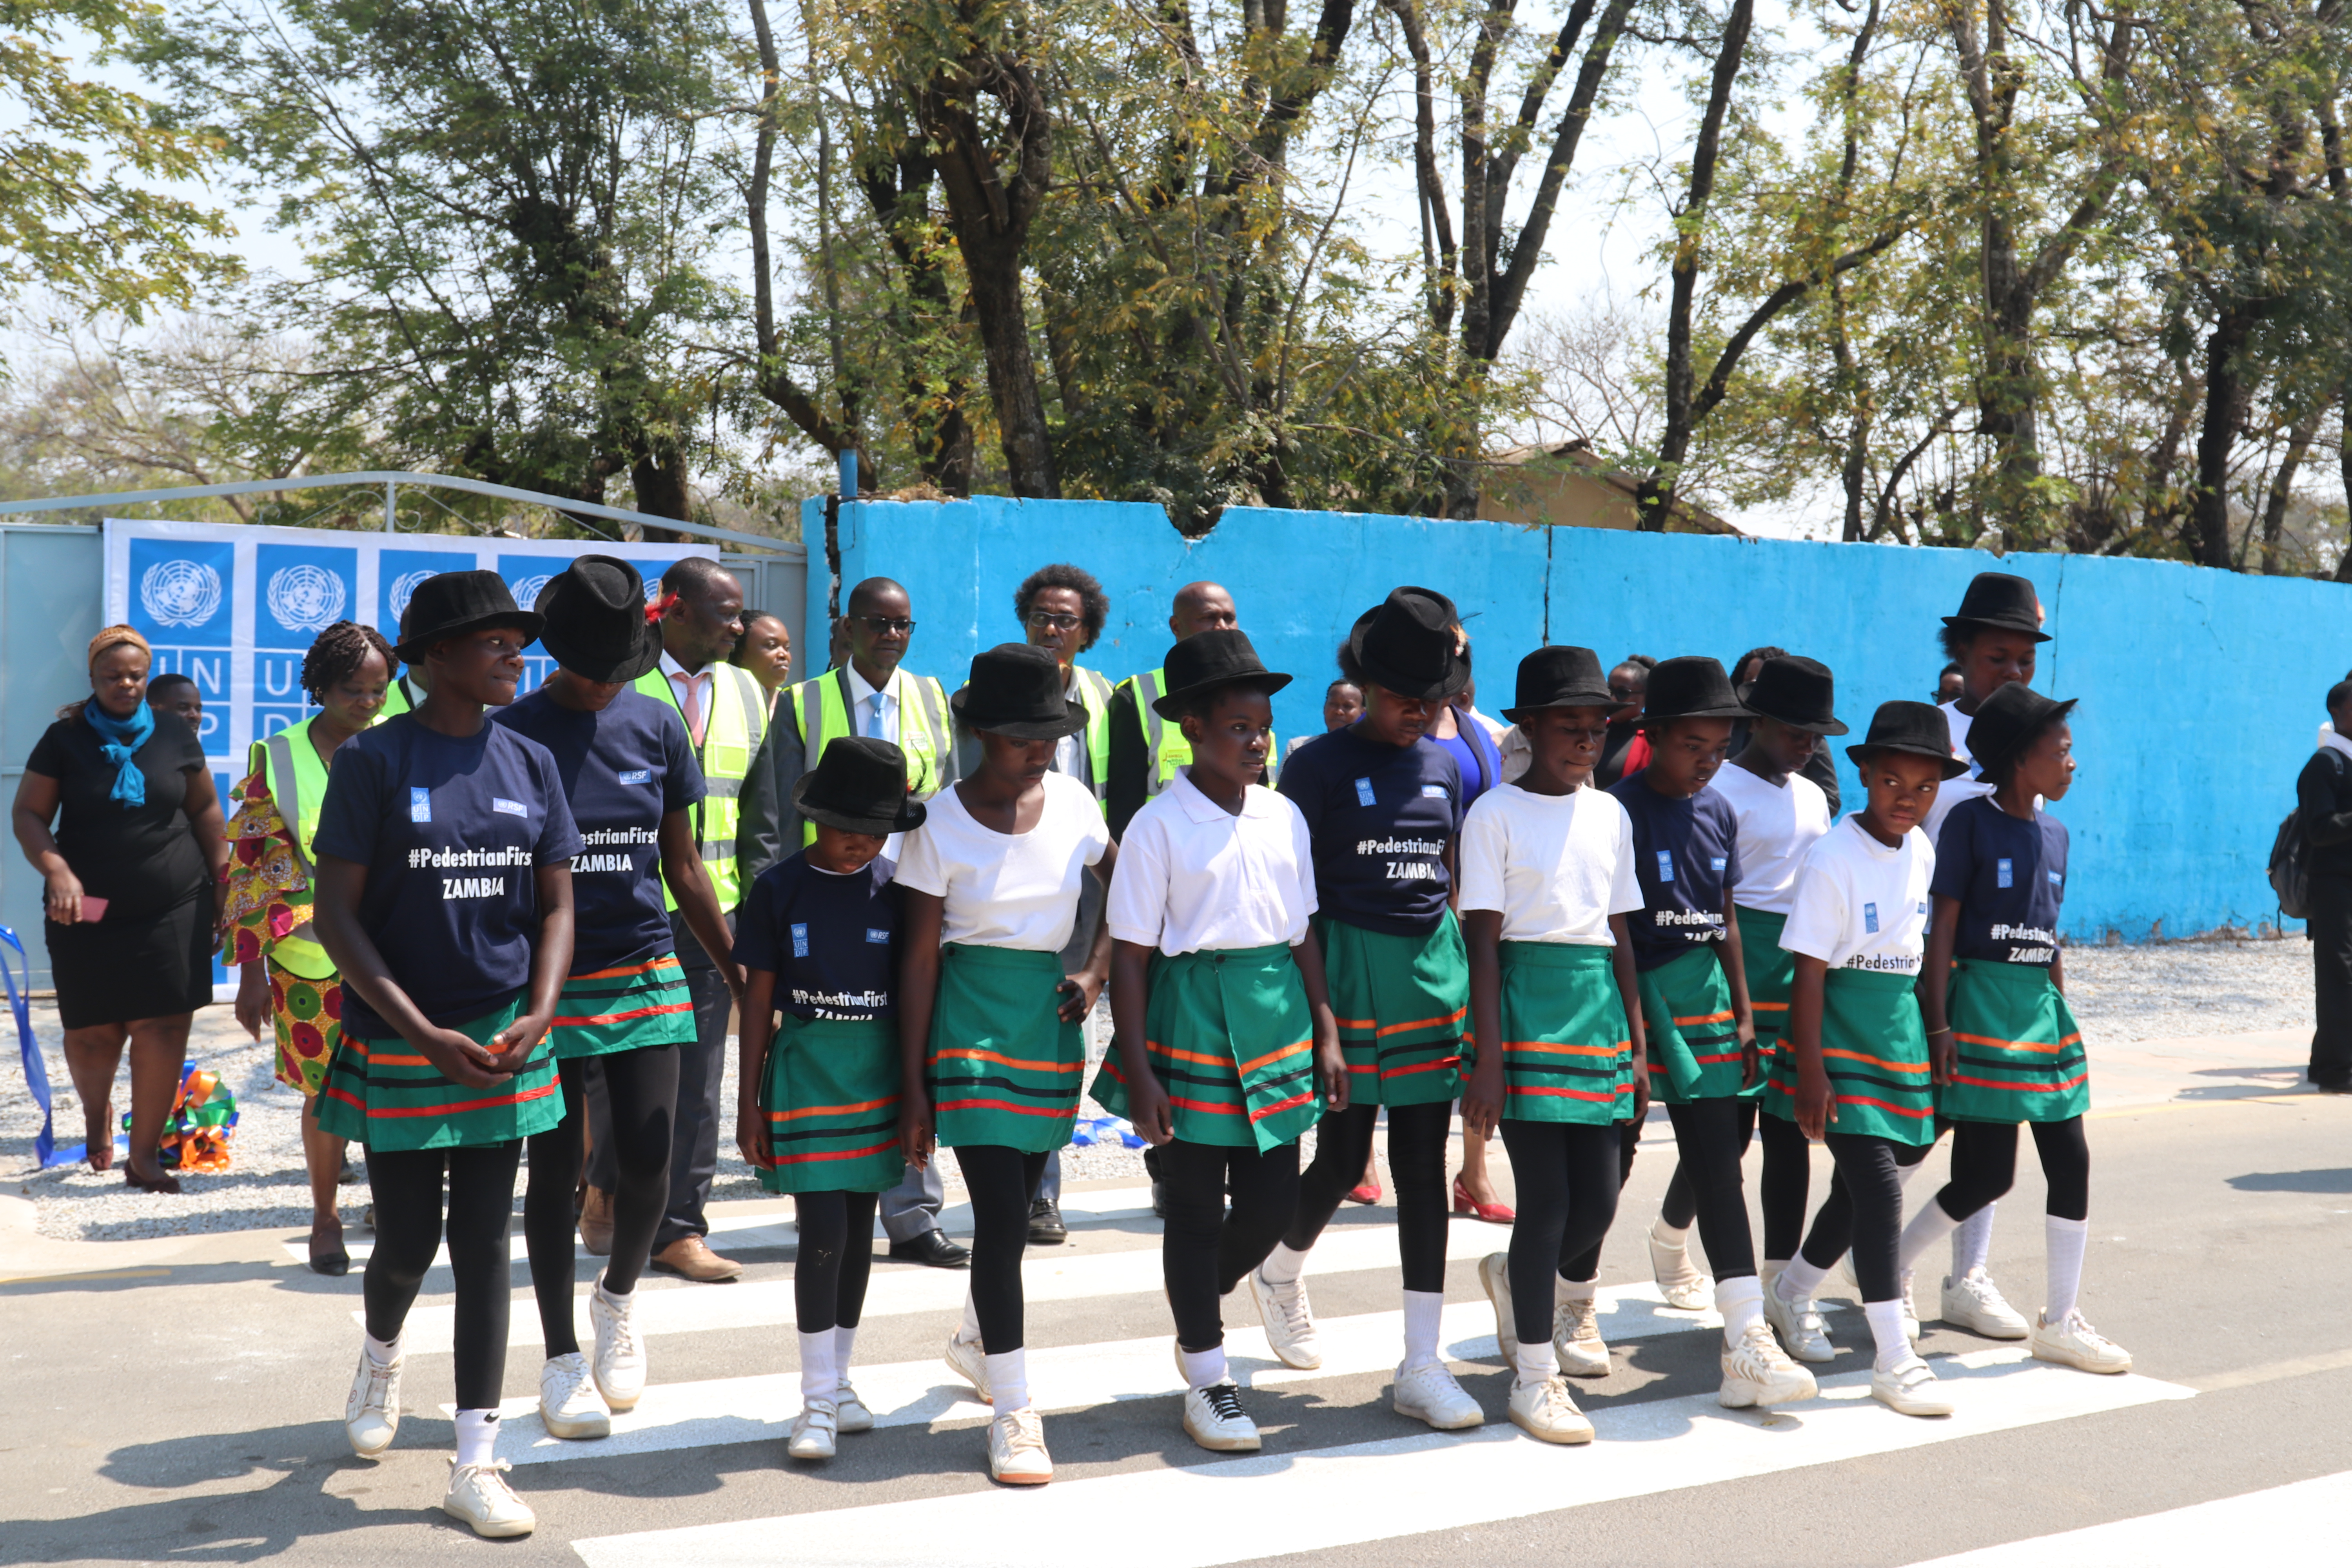 Student at Jacaranda Combined School crossing the newly painted zebra crossing at the Launch of Safe Schools Infrastructural Improvements in Lusaka